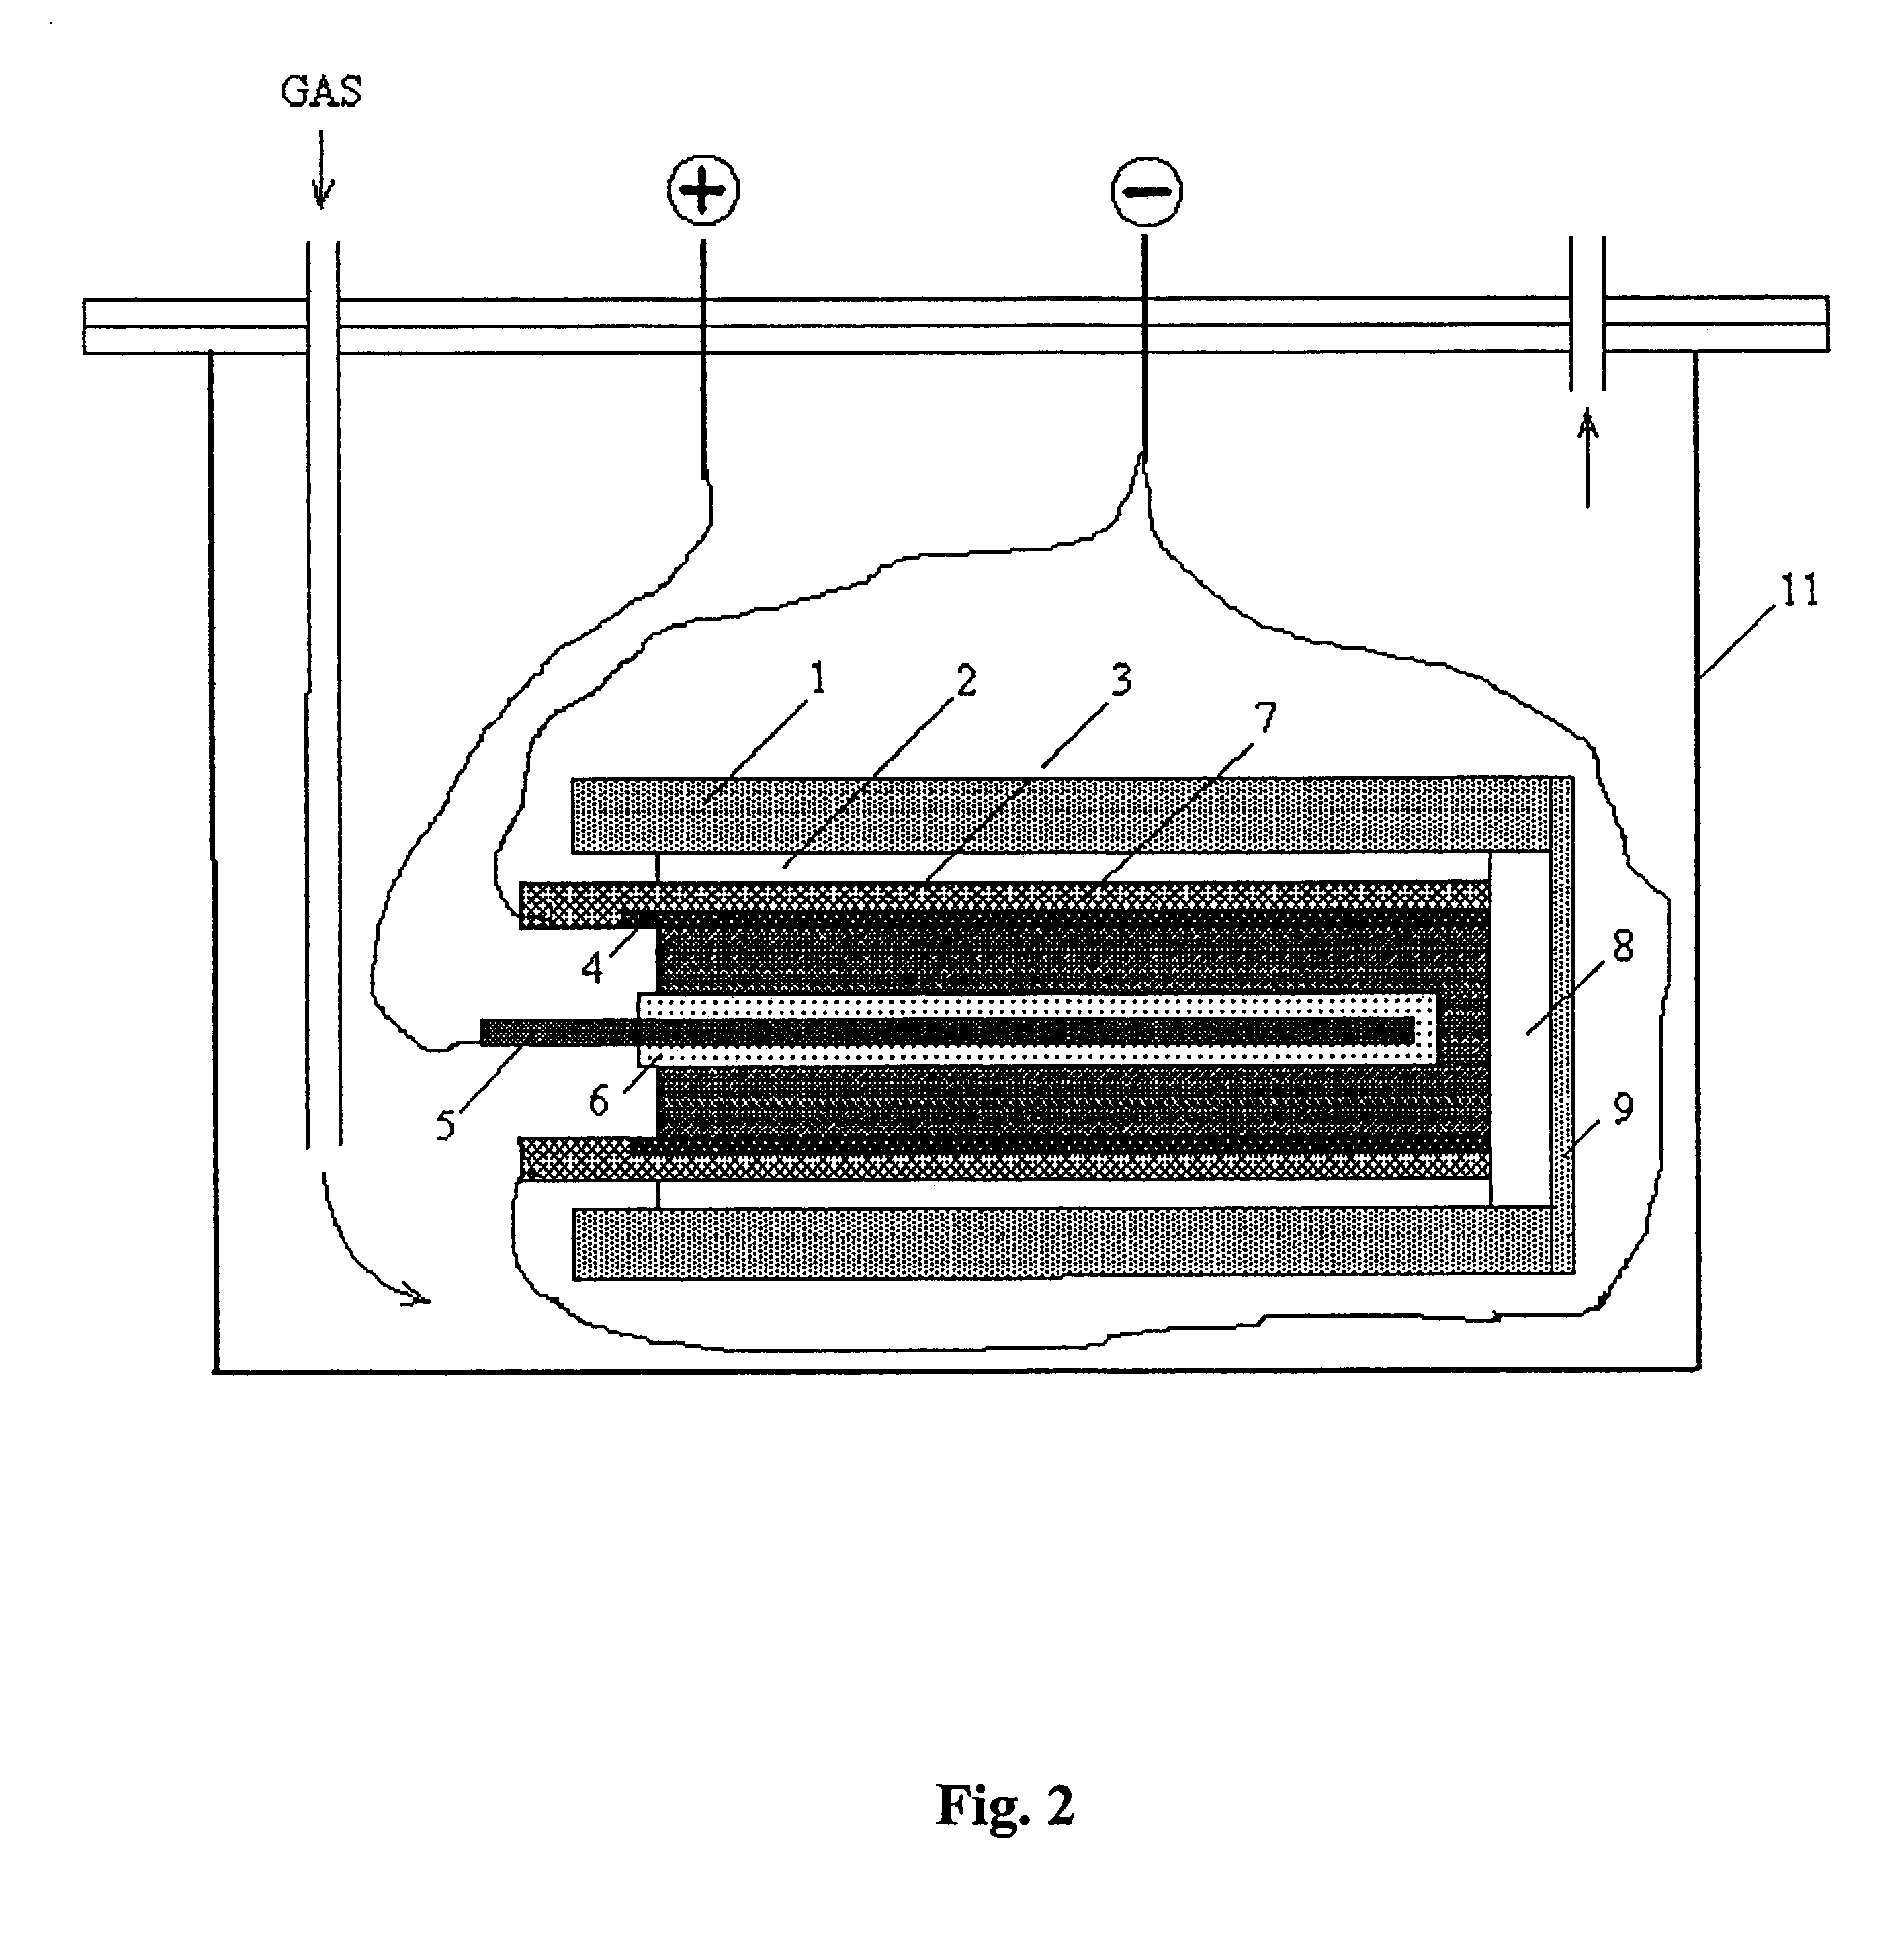 Method of formation and charge of the negative polarizable carbon electrode in an electric double layer capacitor